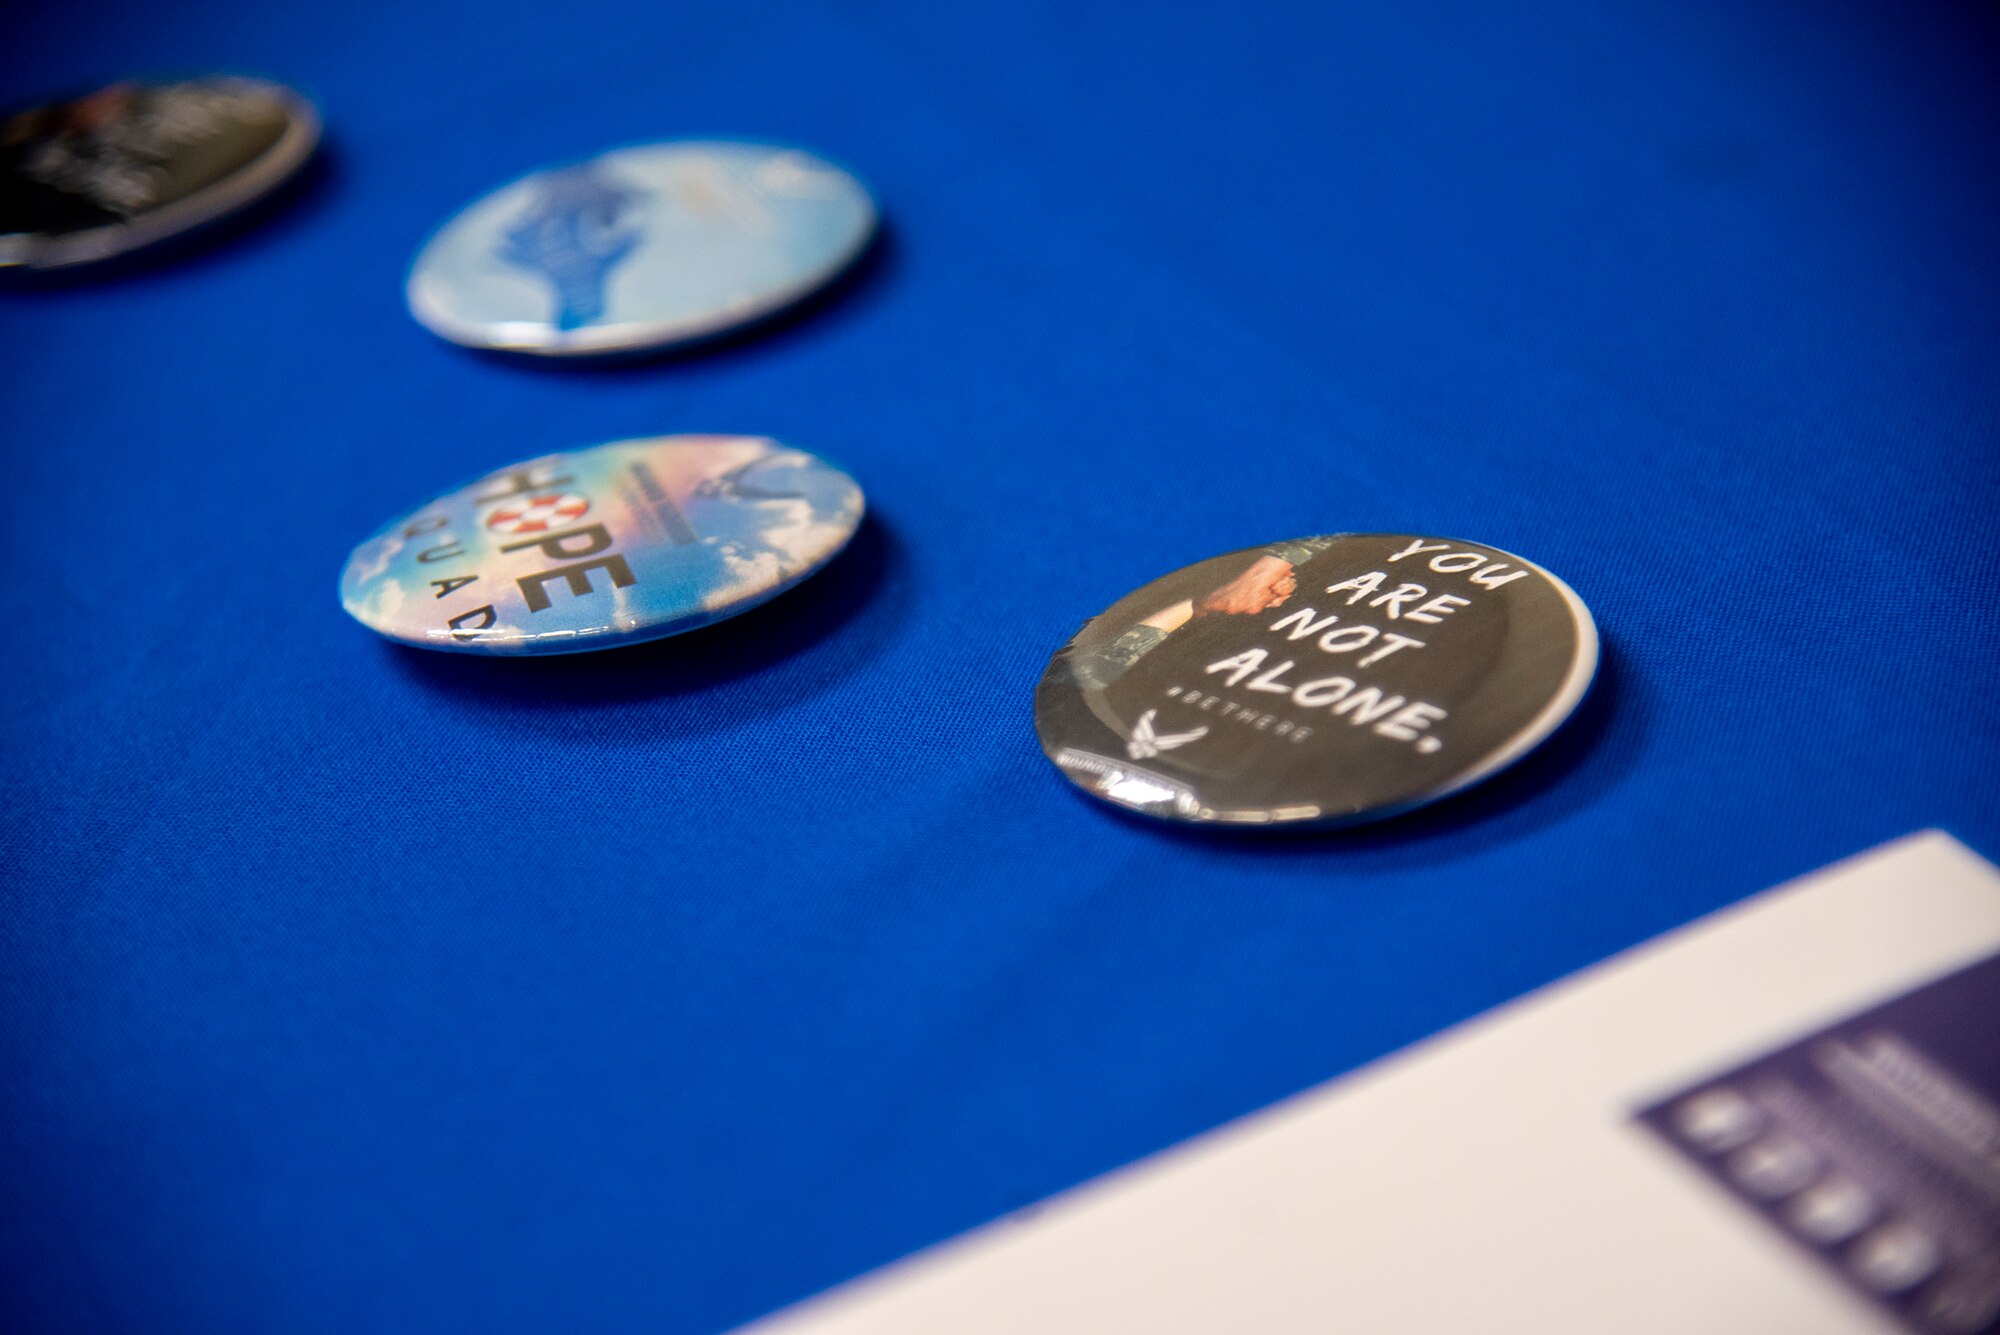 Four buttons with suicide prevention messaging sit on a presentation table during an Applied Suicide Intervention Skills Training (ASIST) course, led by Air Force Wounded Warrior Program (AFW2) leaders, at MacDill Air Force Base, Florida, May 12, 2021. Suicide prevention and Airmen’s resiliency remain a top priority for the U.S. Air Force and Team MacDill.